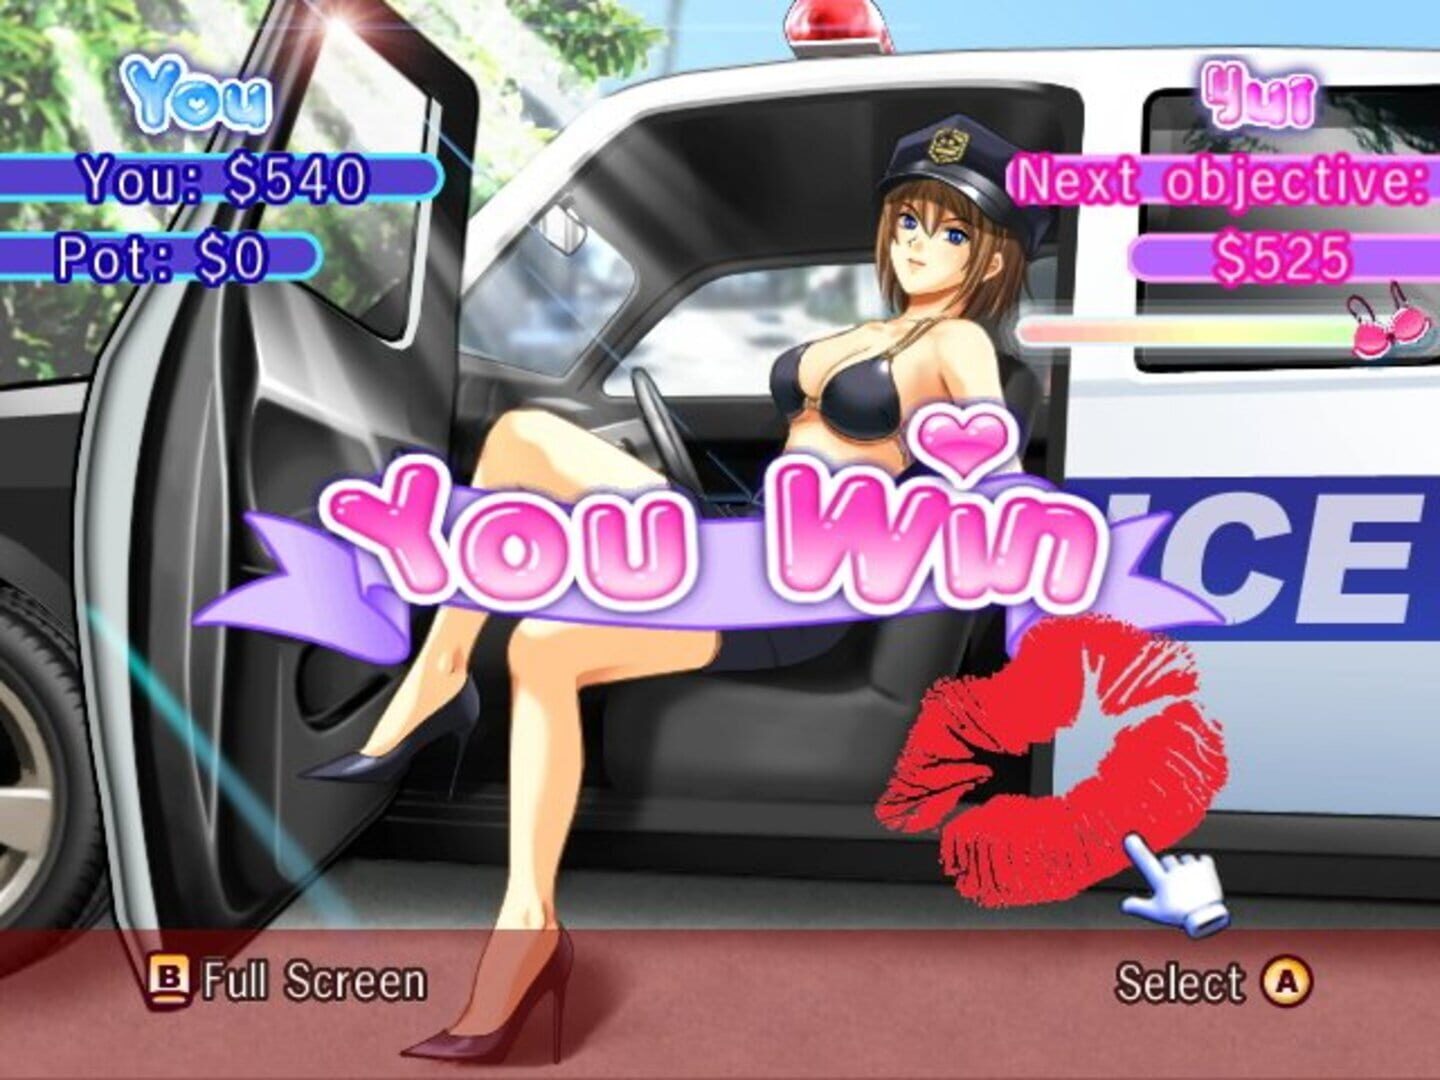 Get Your Heart Racing with Pivigames' Seductive Gallery